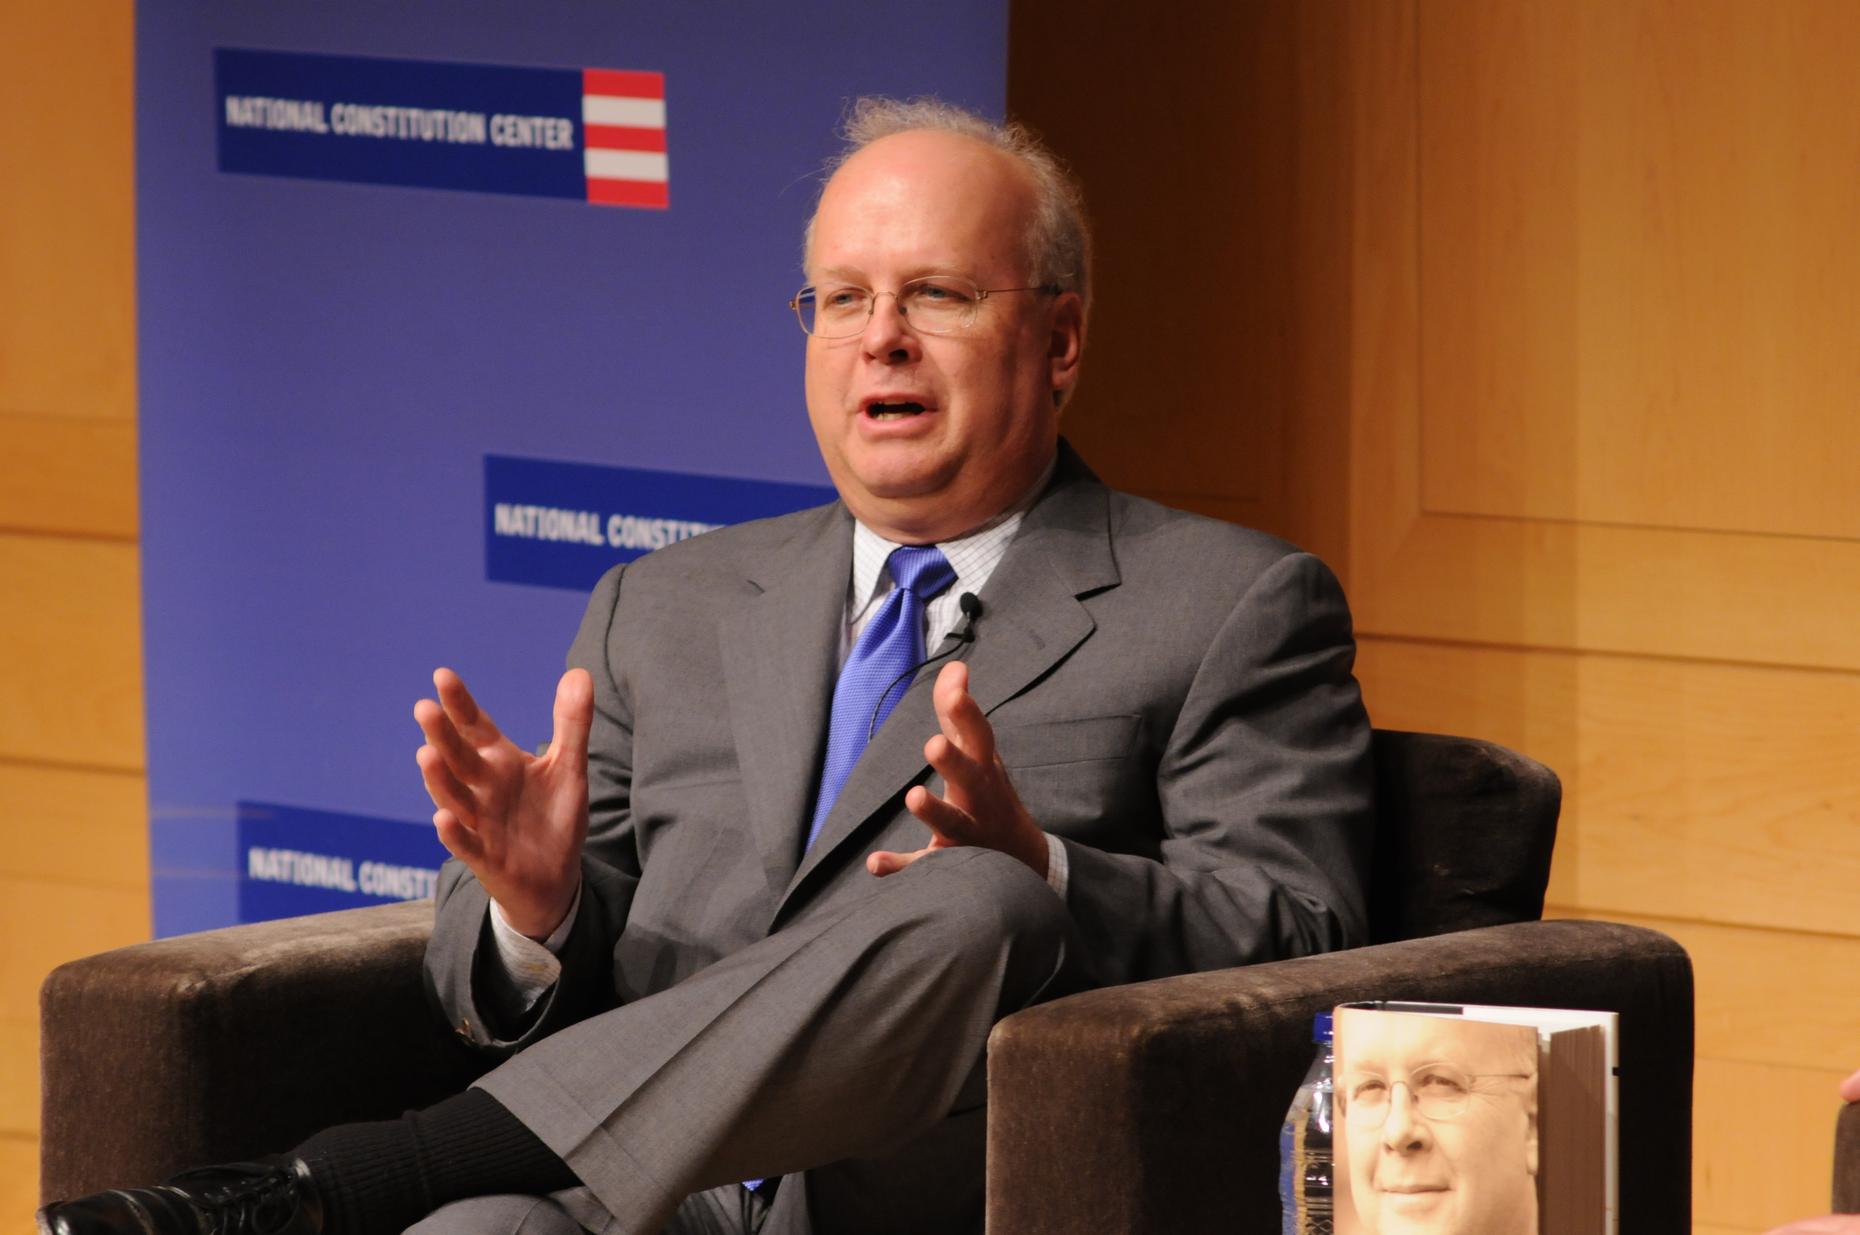 Dick cheney and karl rove